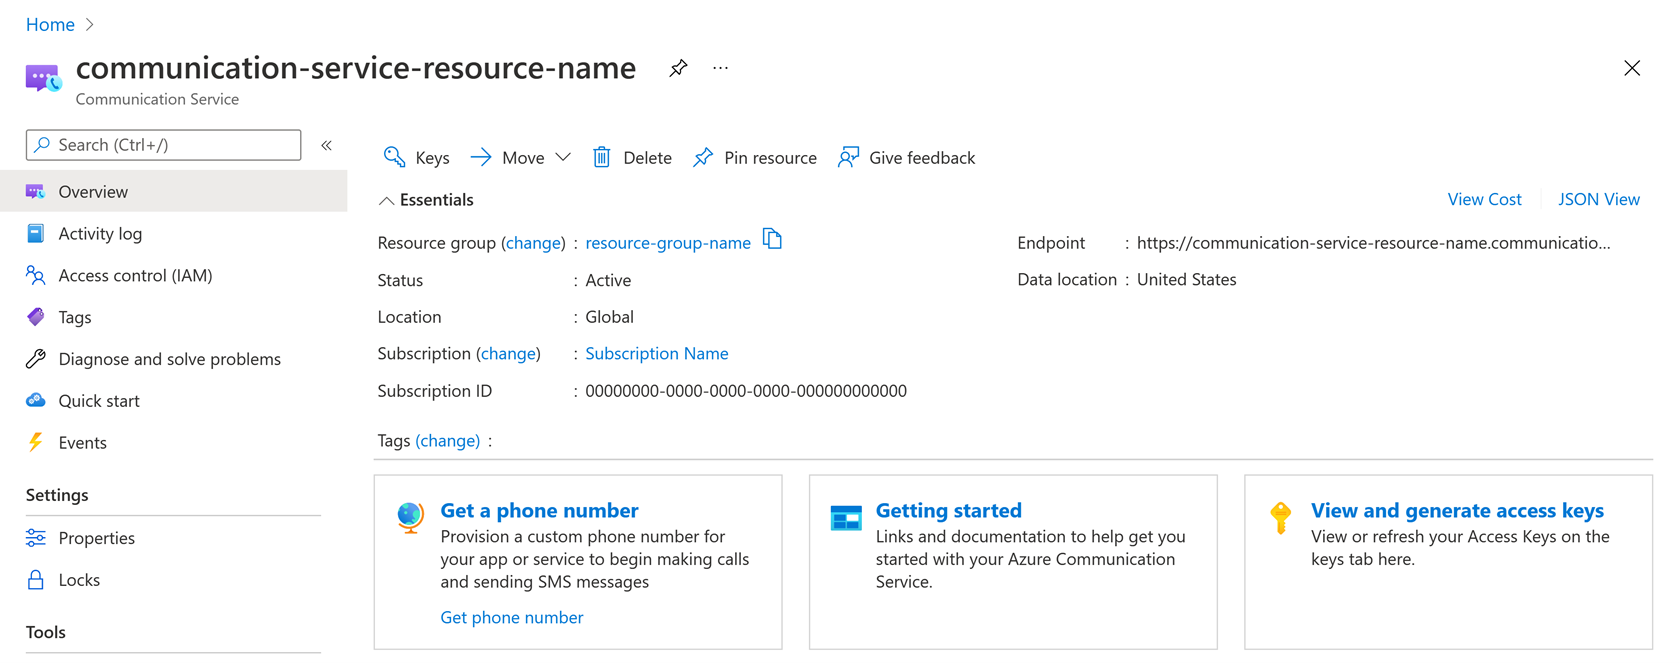 image of Email Communication Services resource once configured in Azure